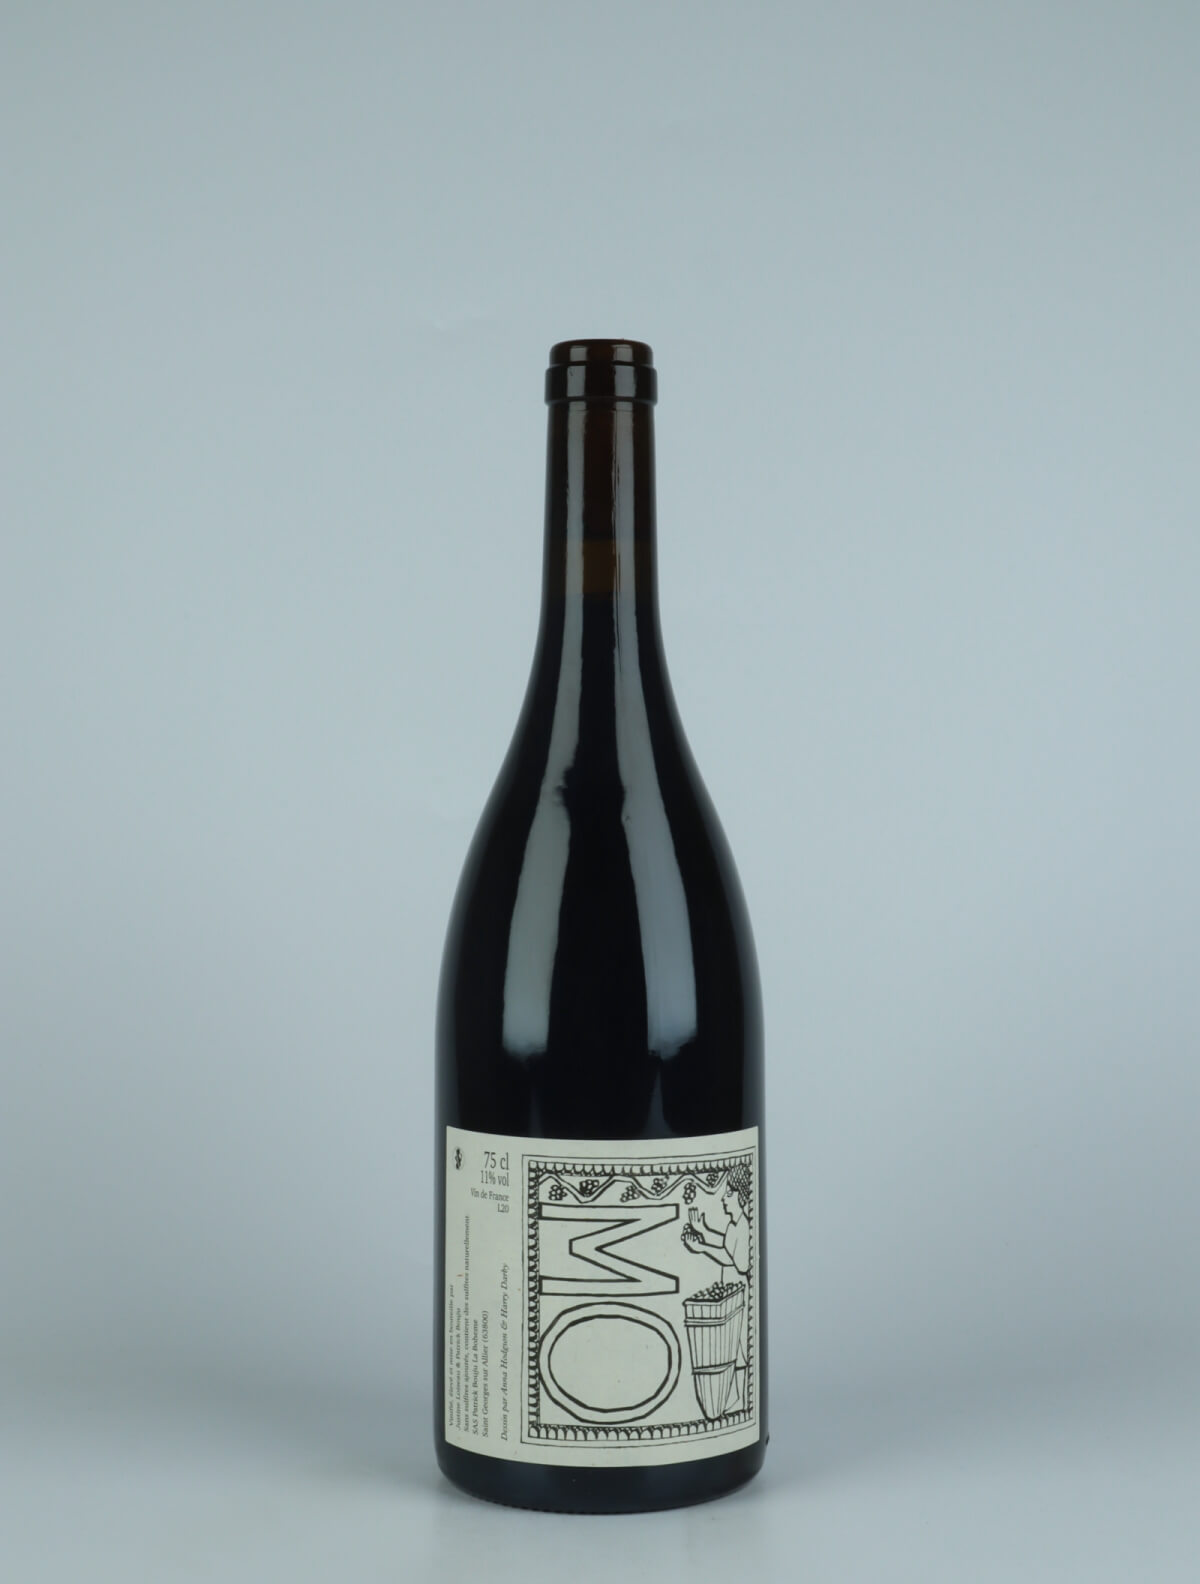 A bottle 2020 Mo Red wine from Patrick Bouju, Auvergne in France